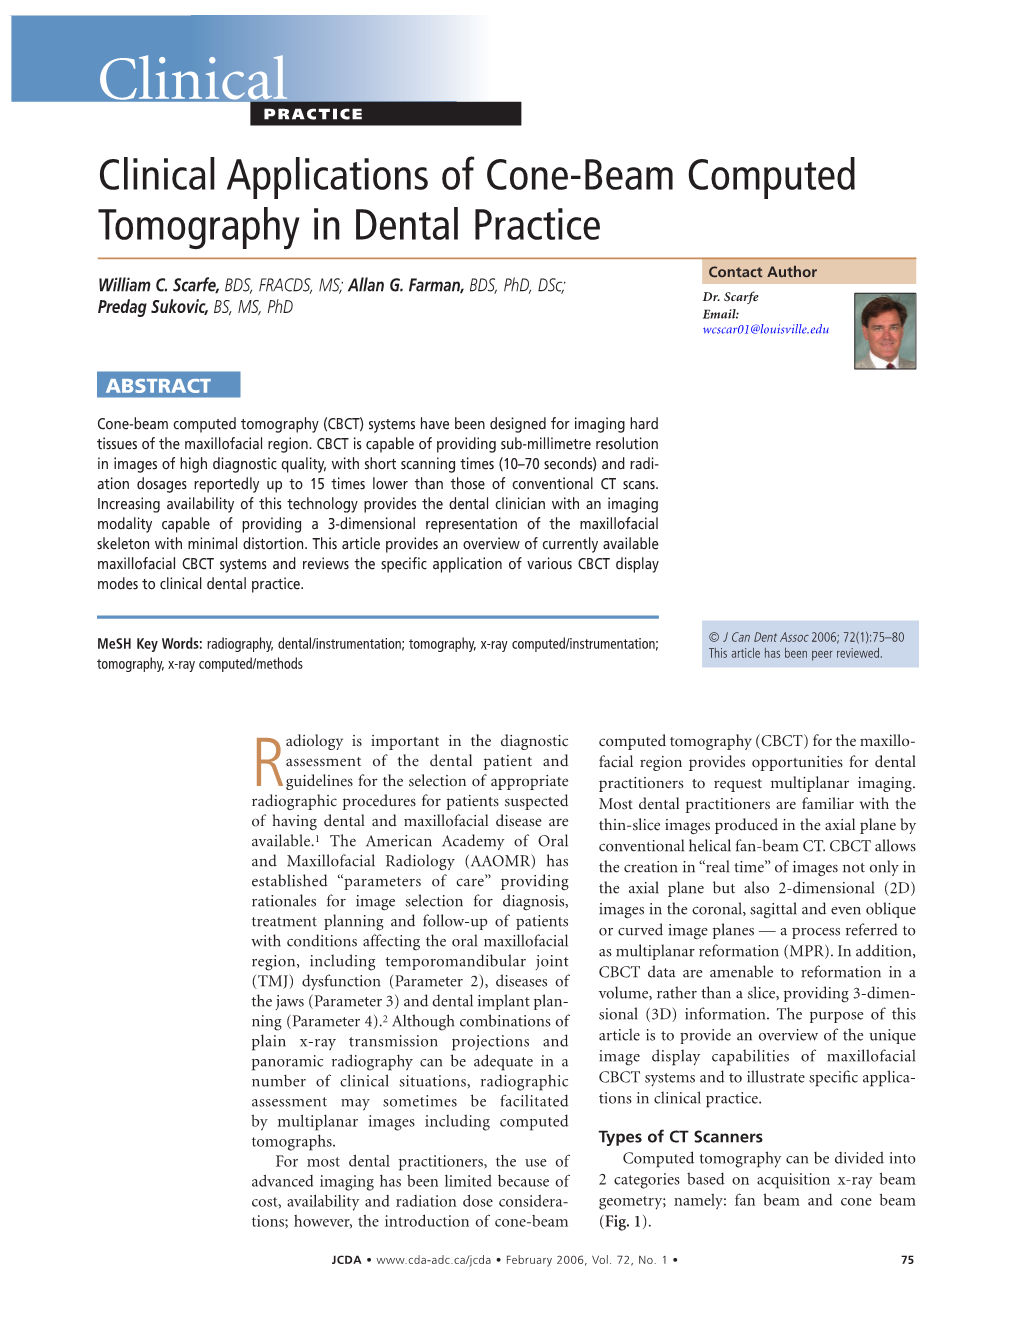 Clinical Applications of Cone-Beam Computed Tomography in Dental Practice